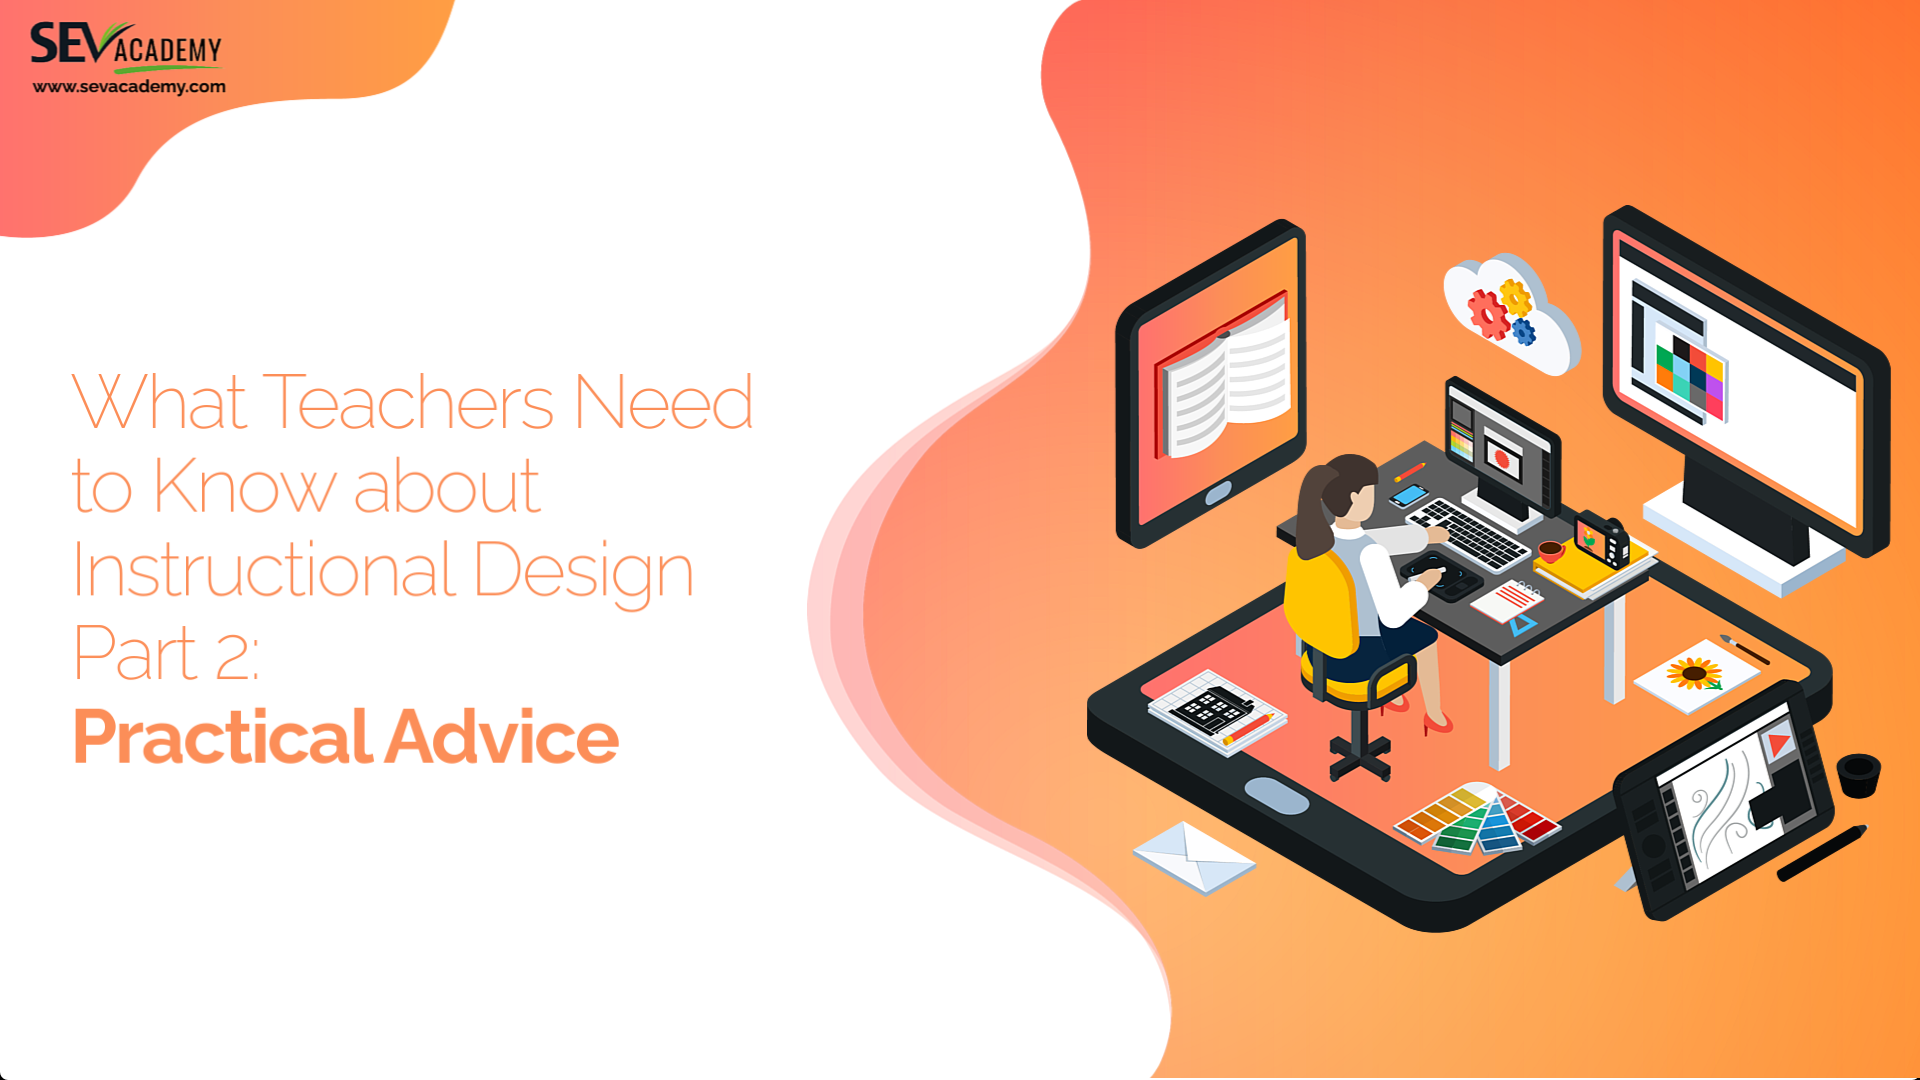 What Teachers Need to Know about Instructional Design Part 2: Practical Advice